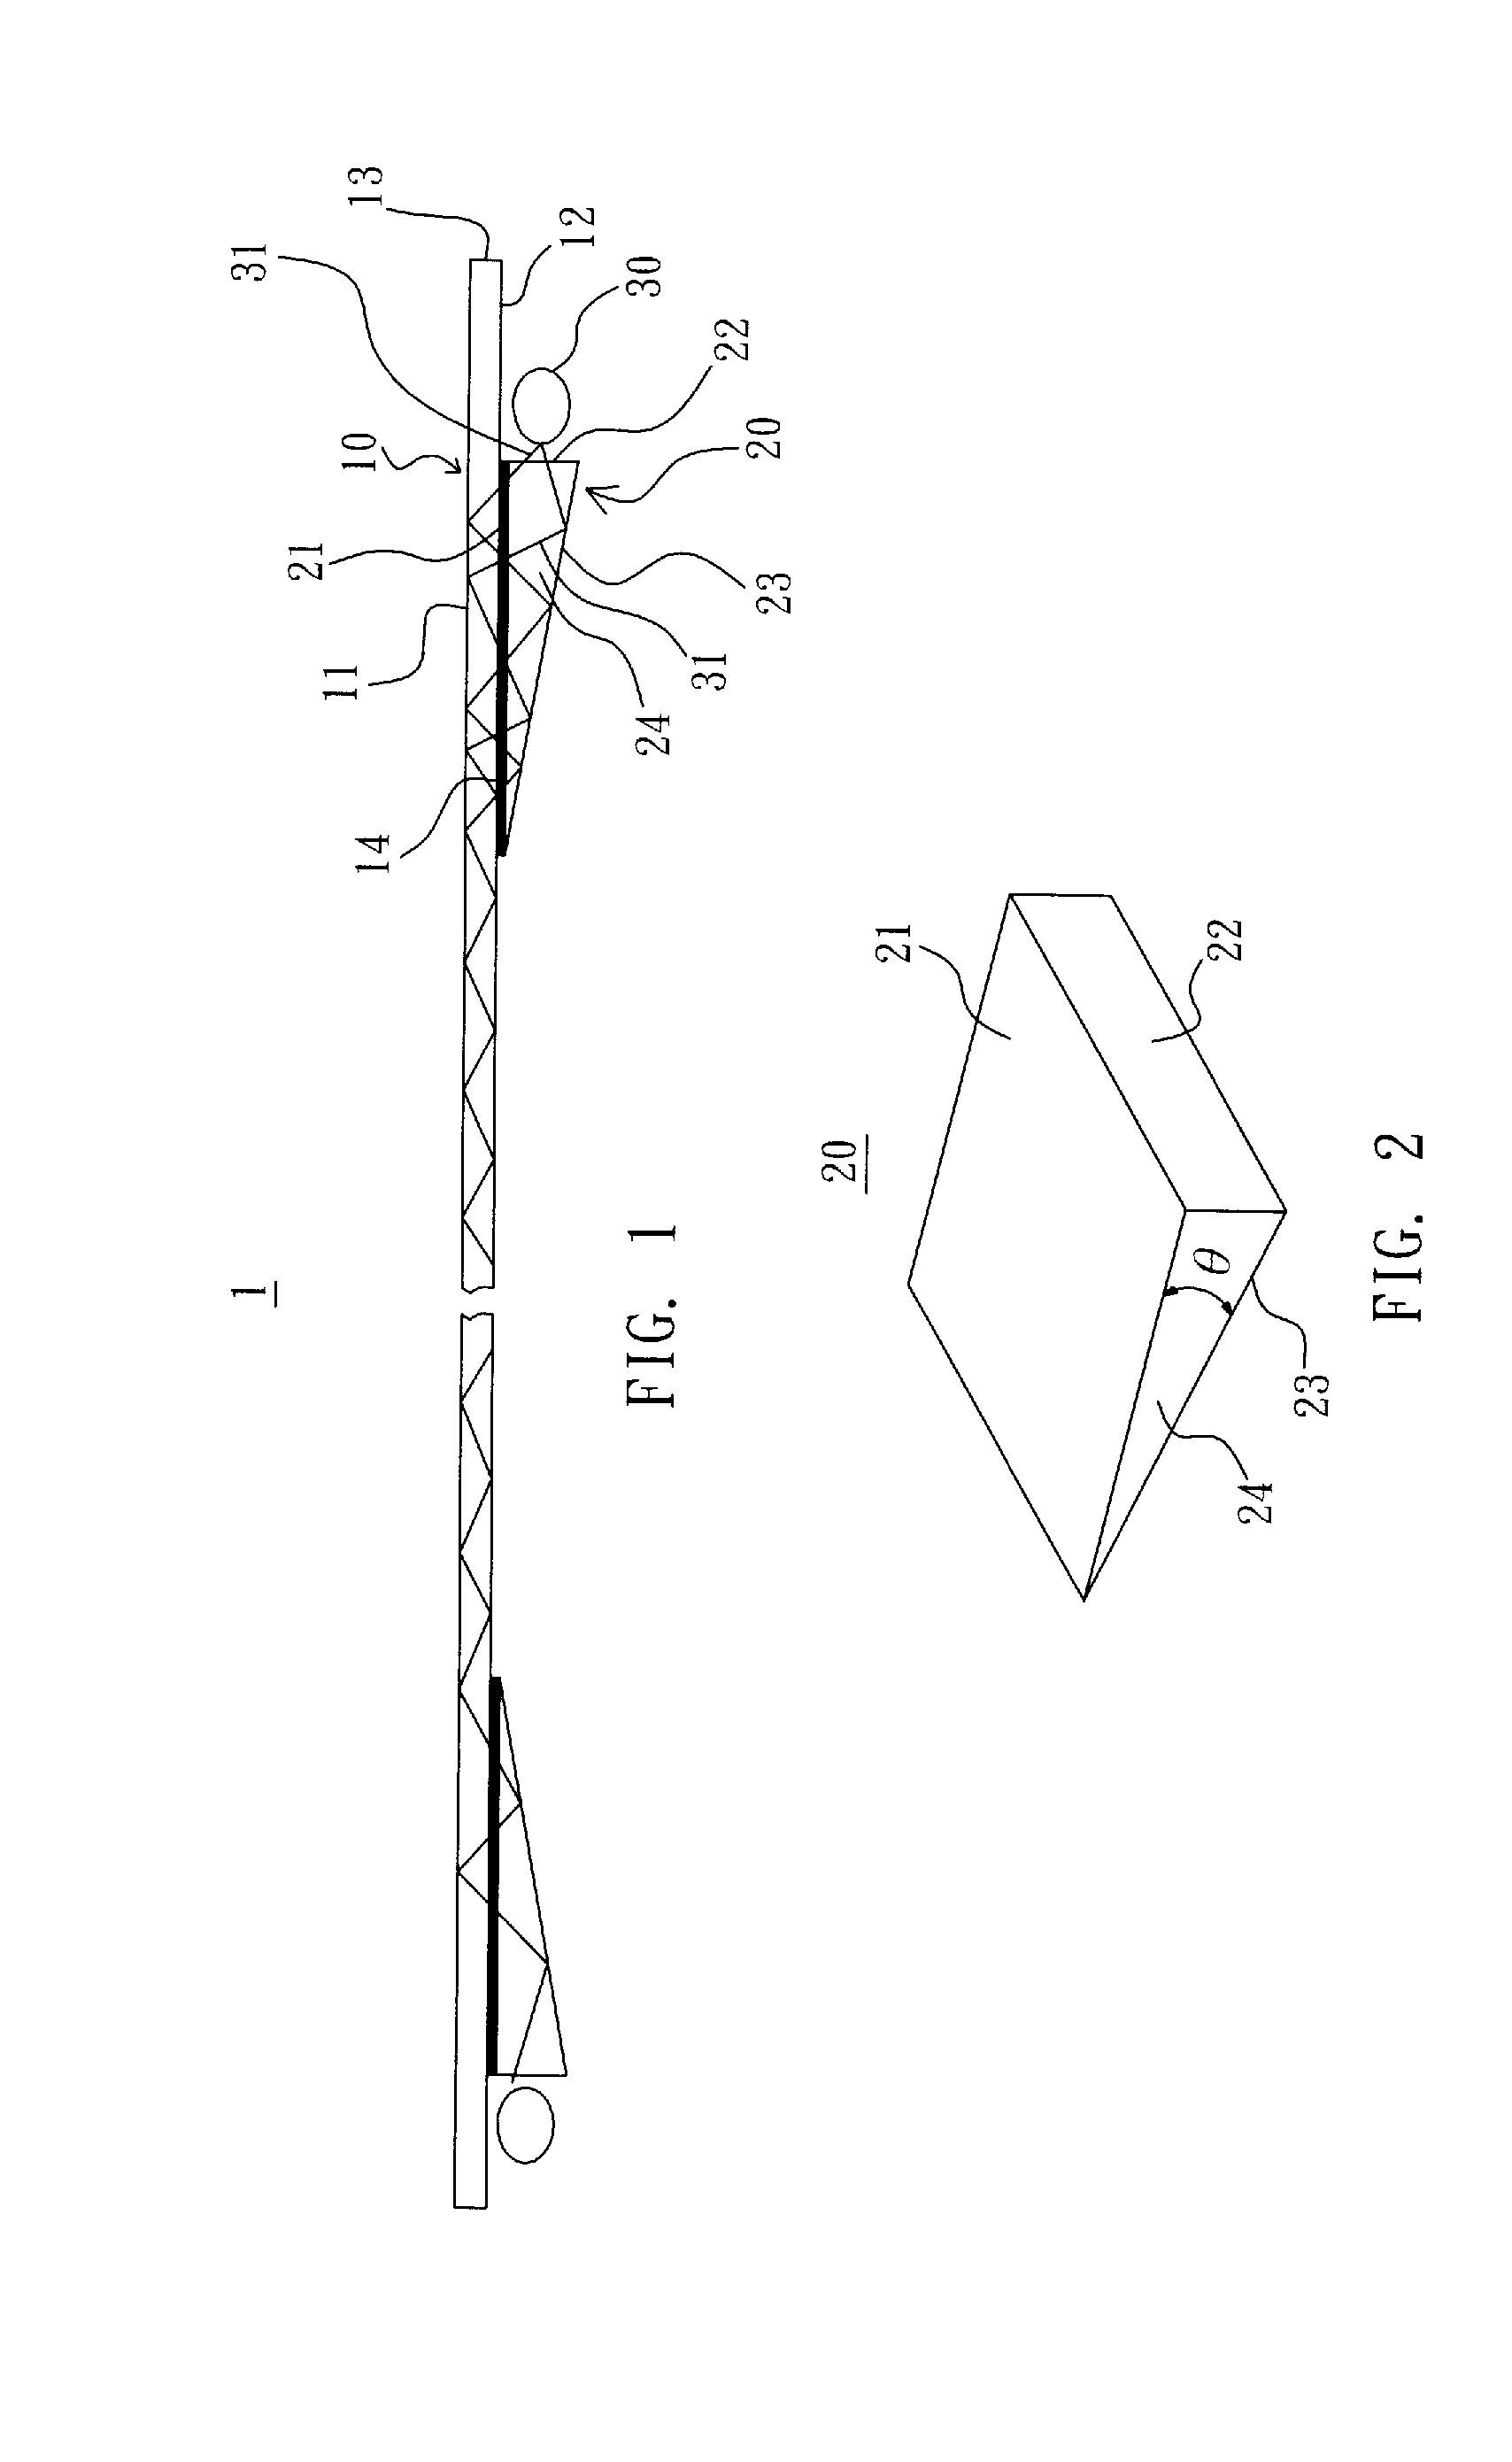 Structure for guiding light into guide light plate to conduct total internal reflection